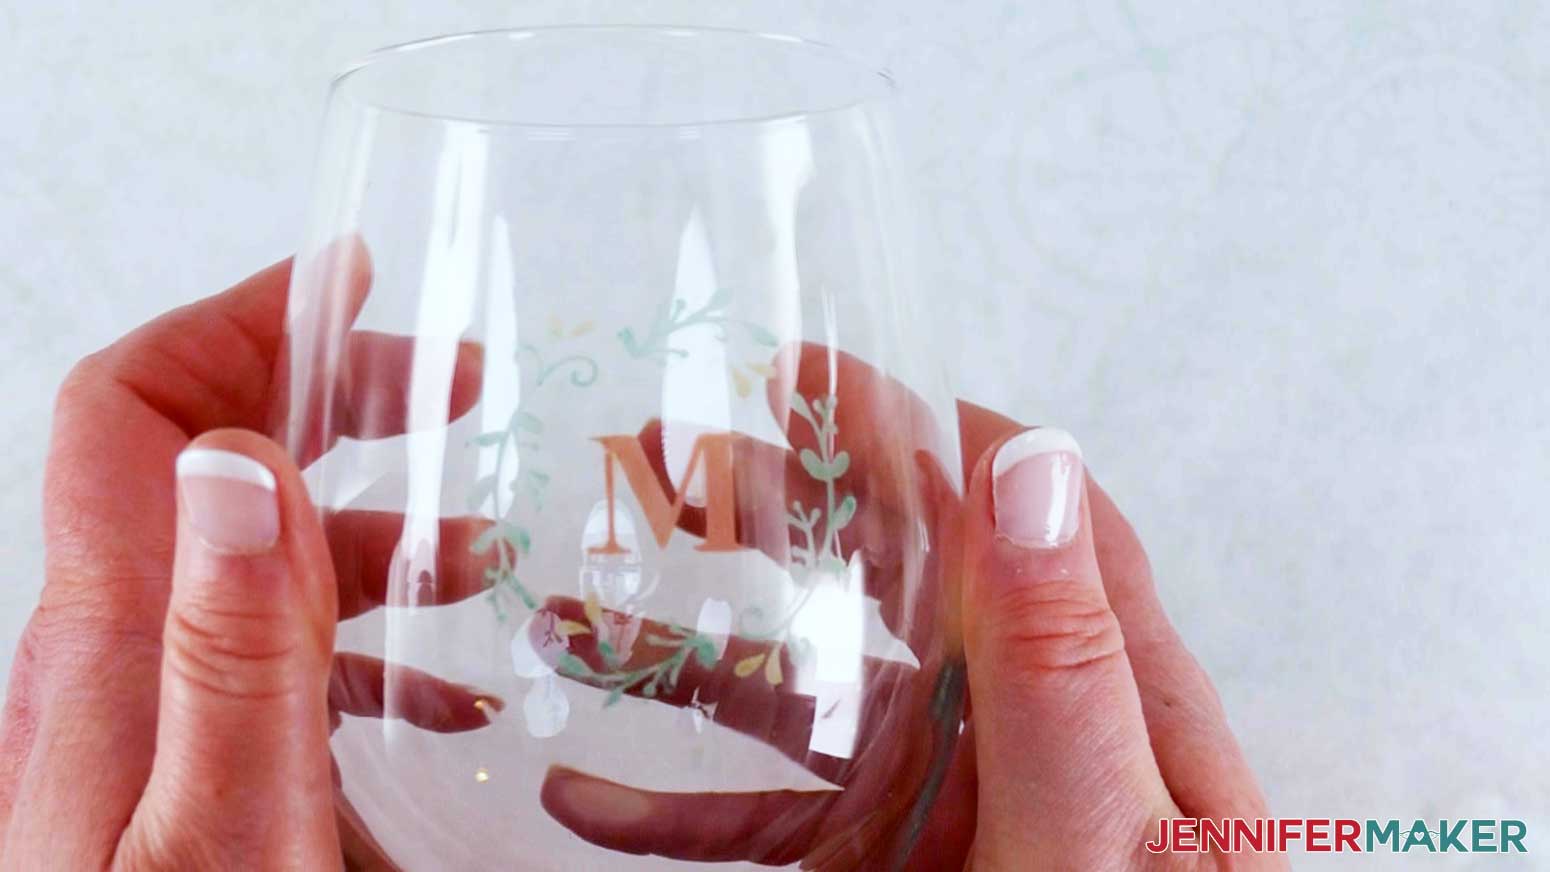 A photo showing two hands holding a wine glass with the color glass etching design etched in the center and colored with red, green, and yellow paint